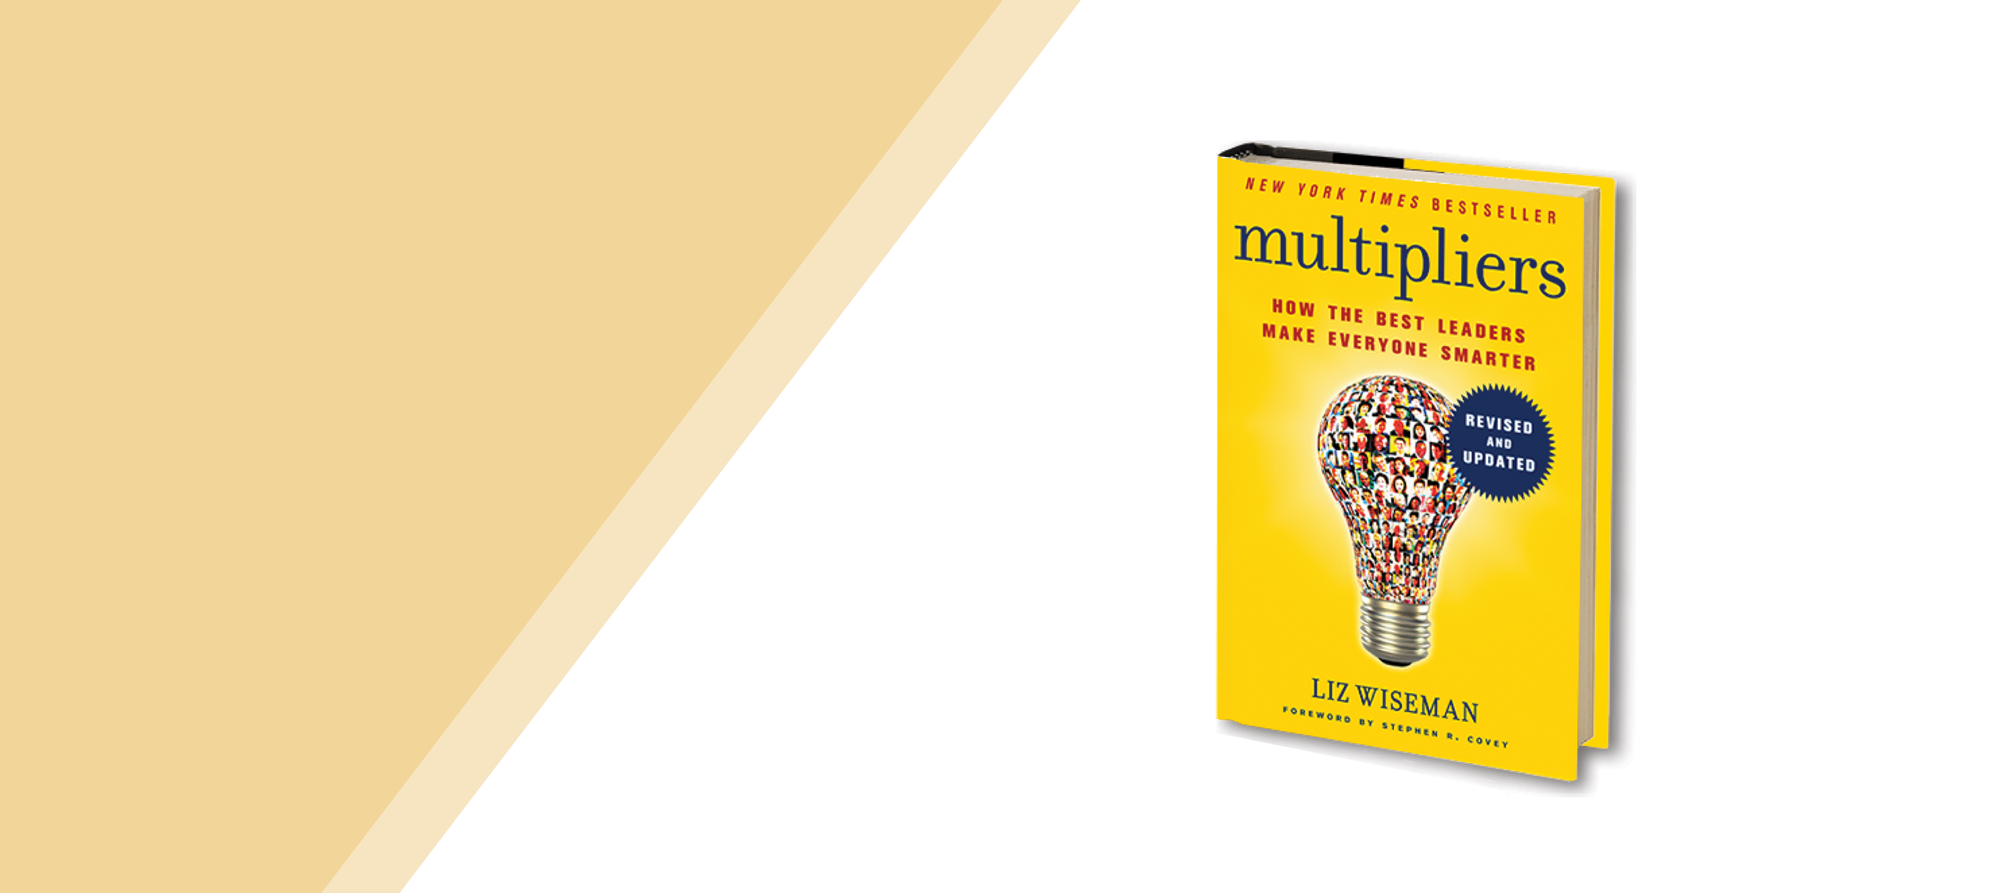 Haven’t Read Multipliers Yet? Here’s What You Need to Know.